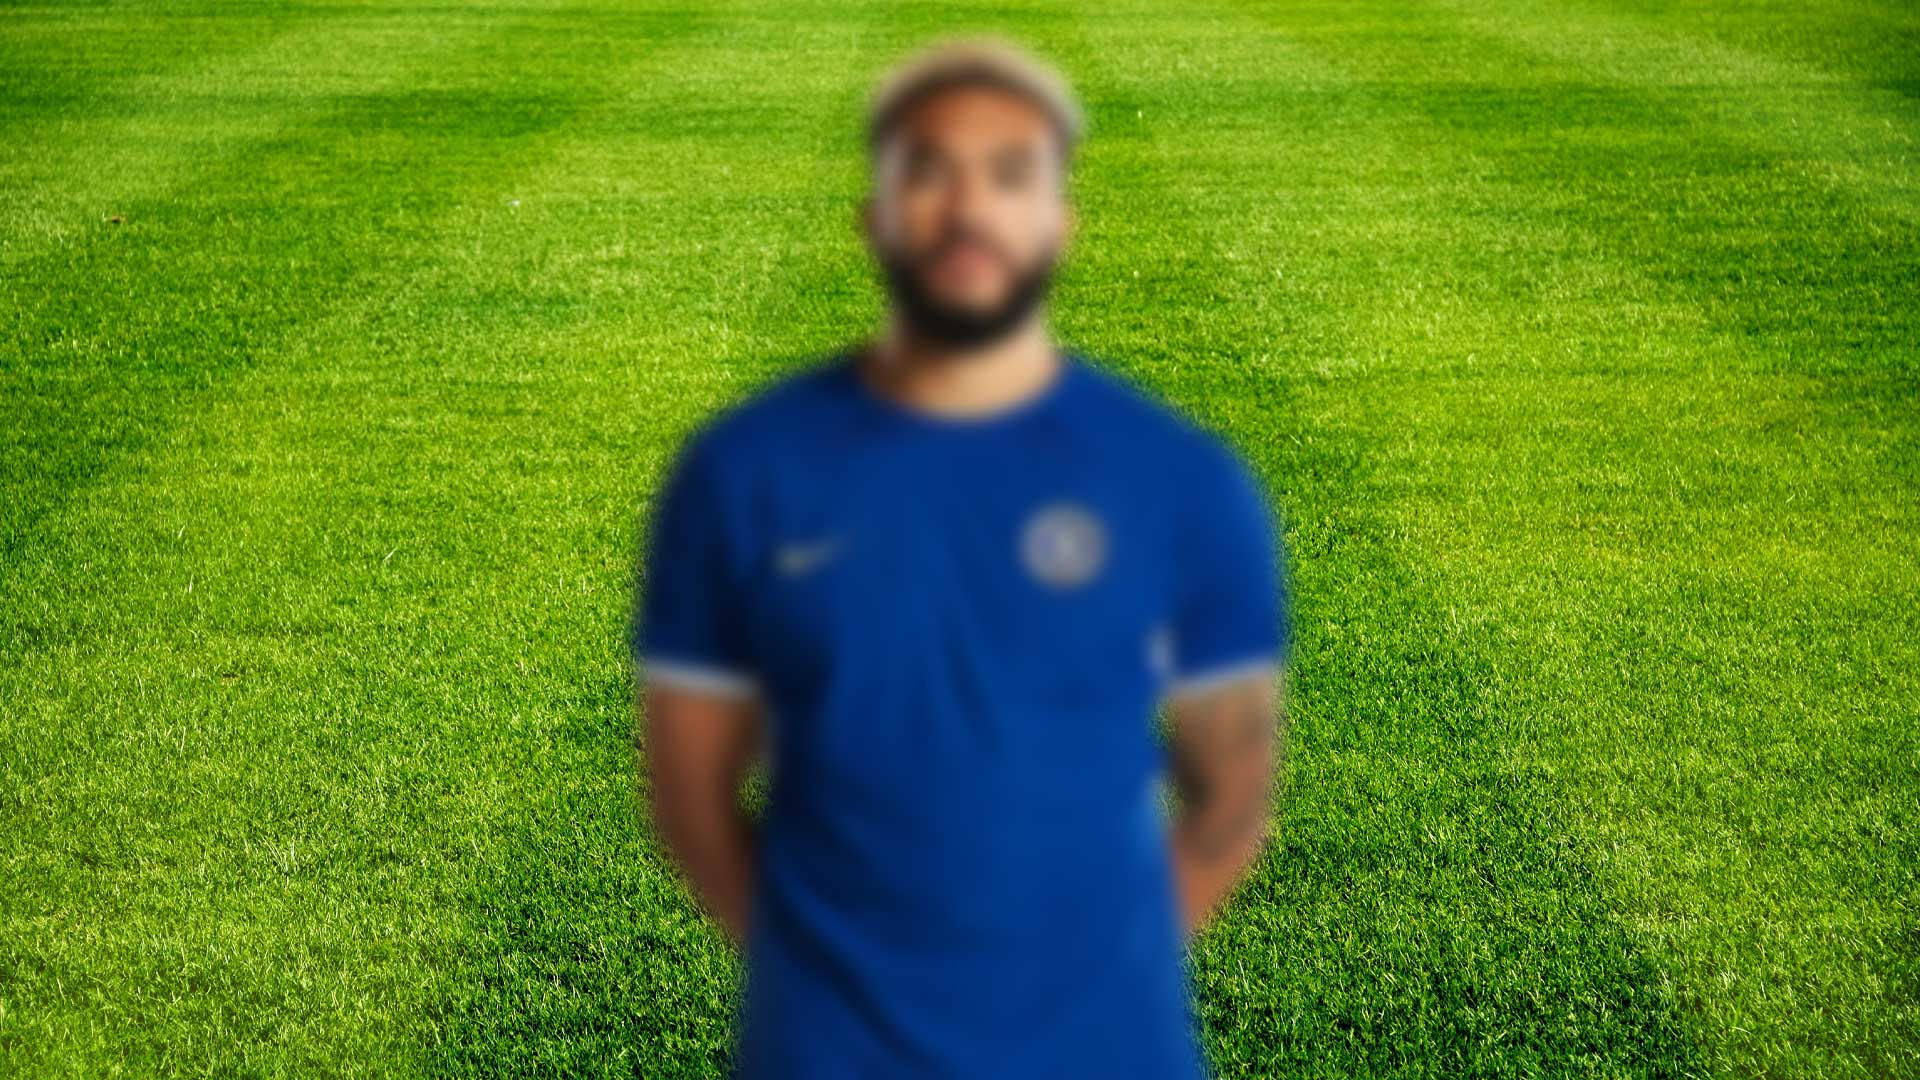 A blurred Chelsea player